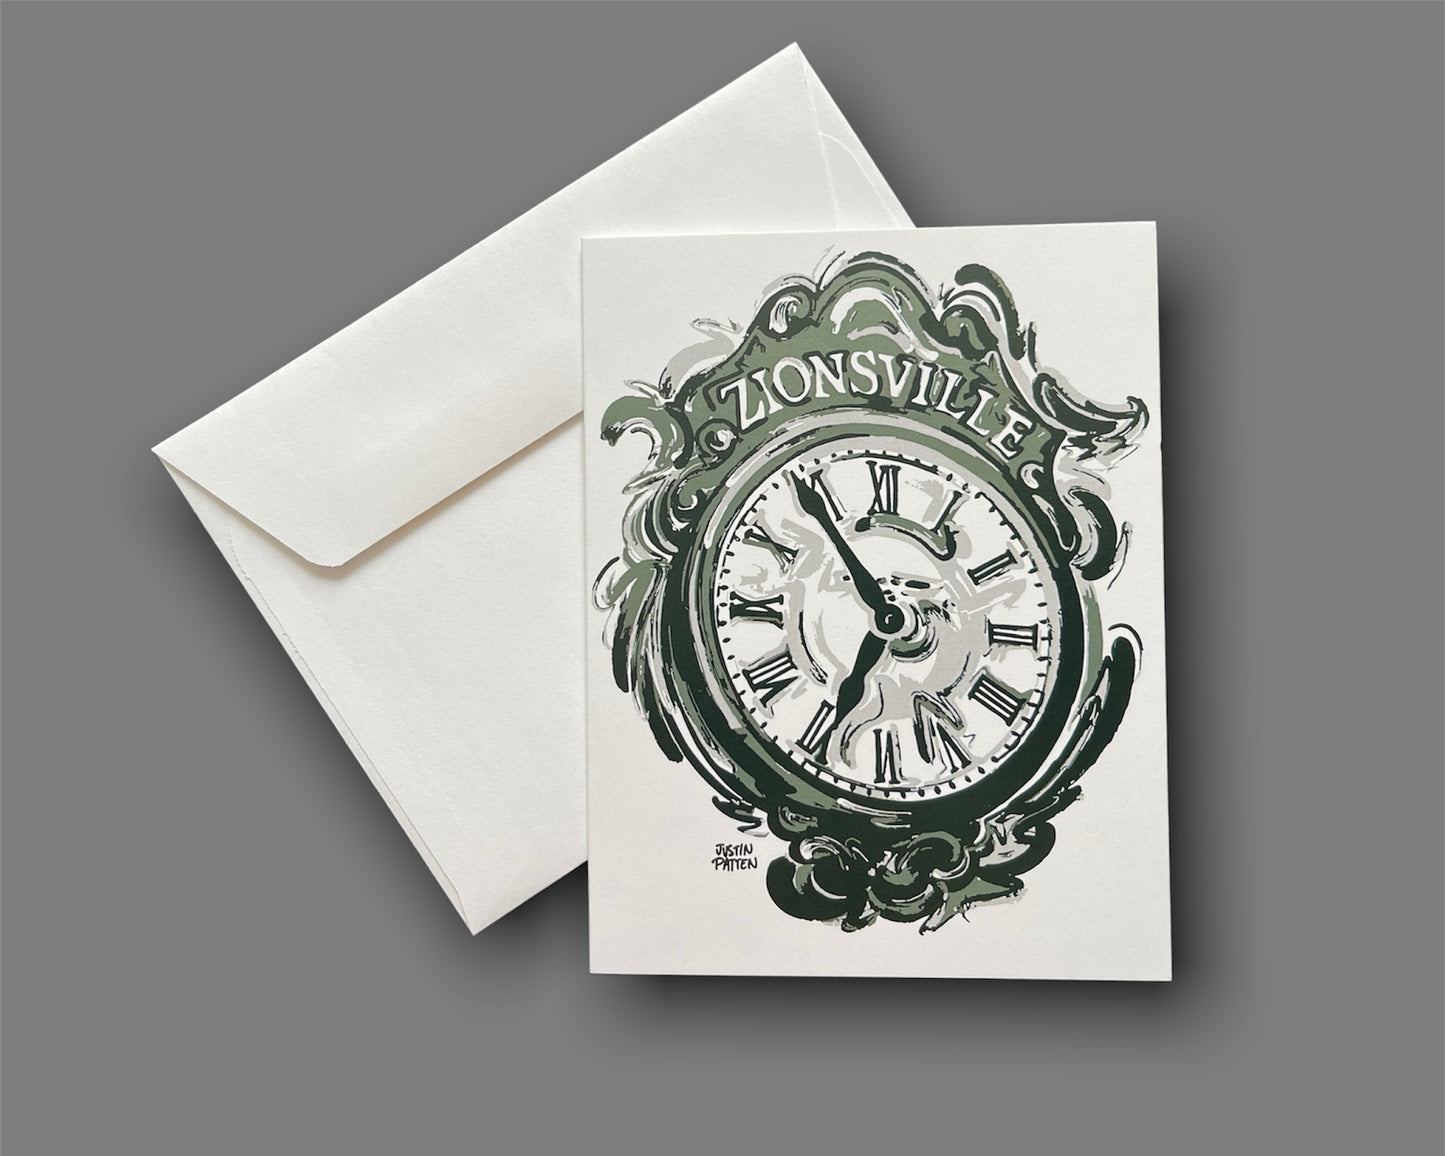 Zionsville Note Card Set of 6 by Justin Patten